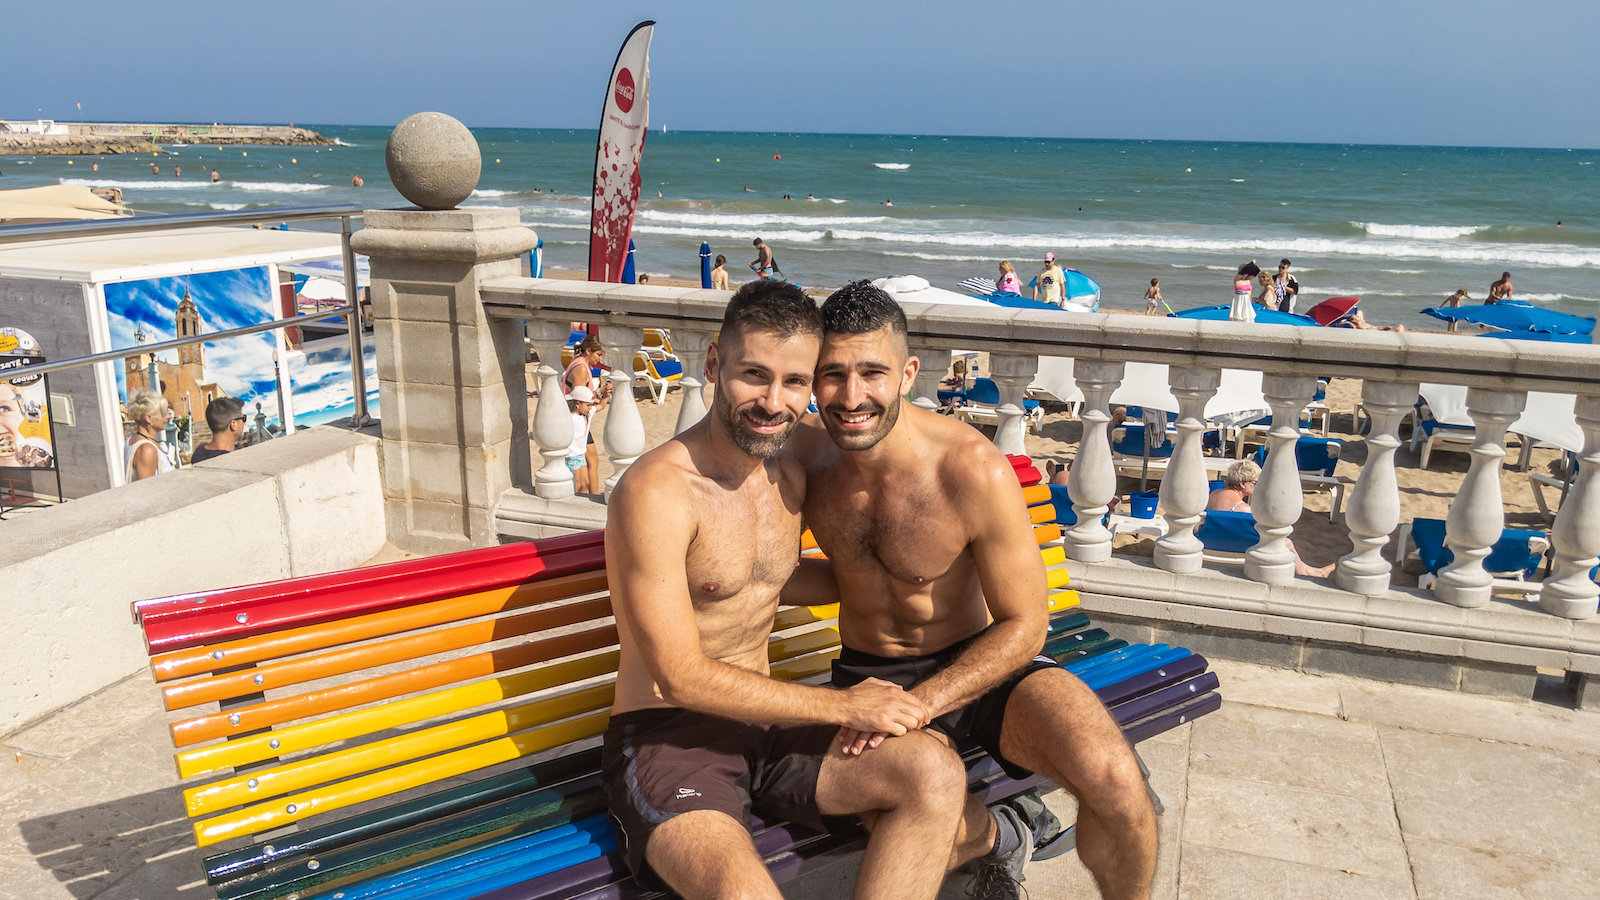 Bassa Rodona in Sitges is one of our favourite gay beaches in the world